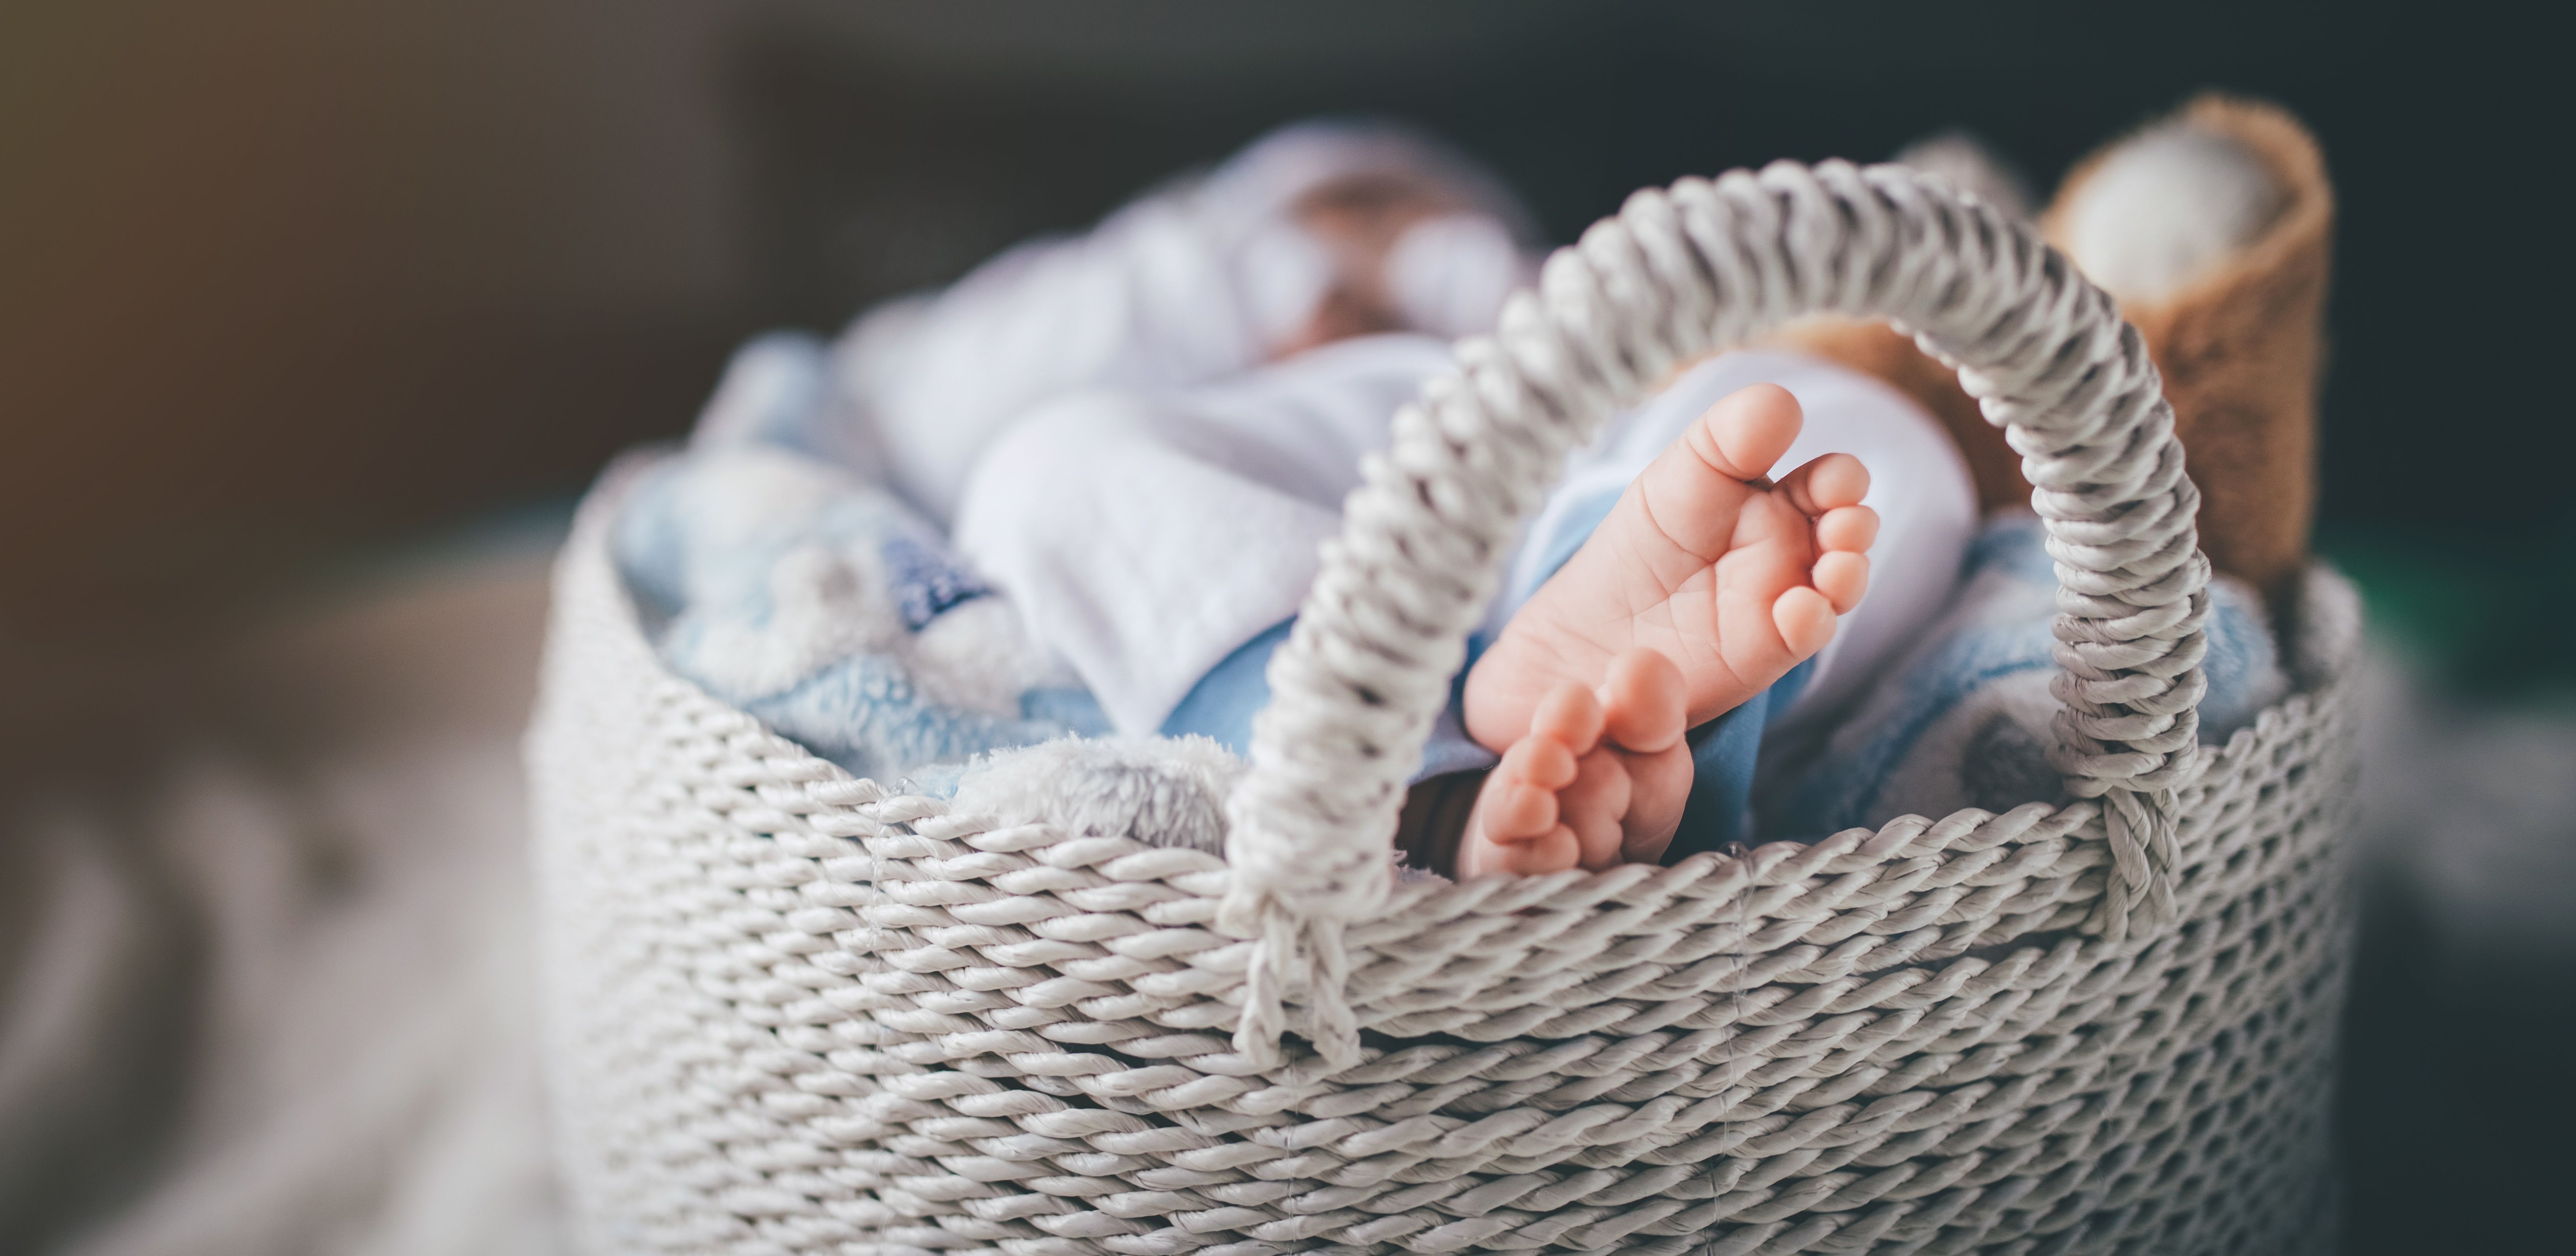 A newborn baby's feet in a basket. | Source: Getty Images